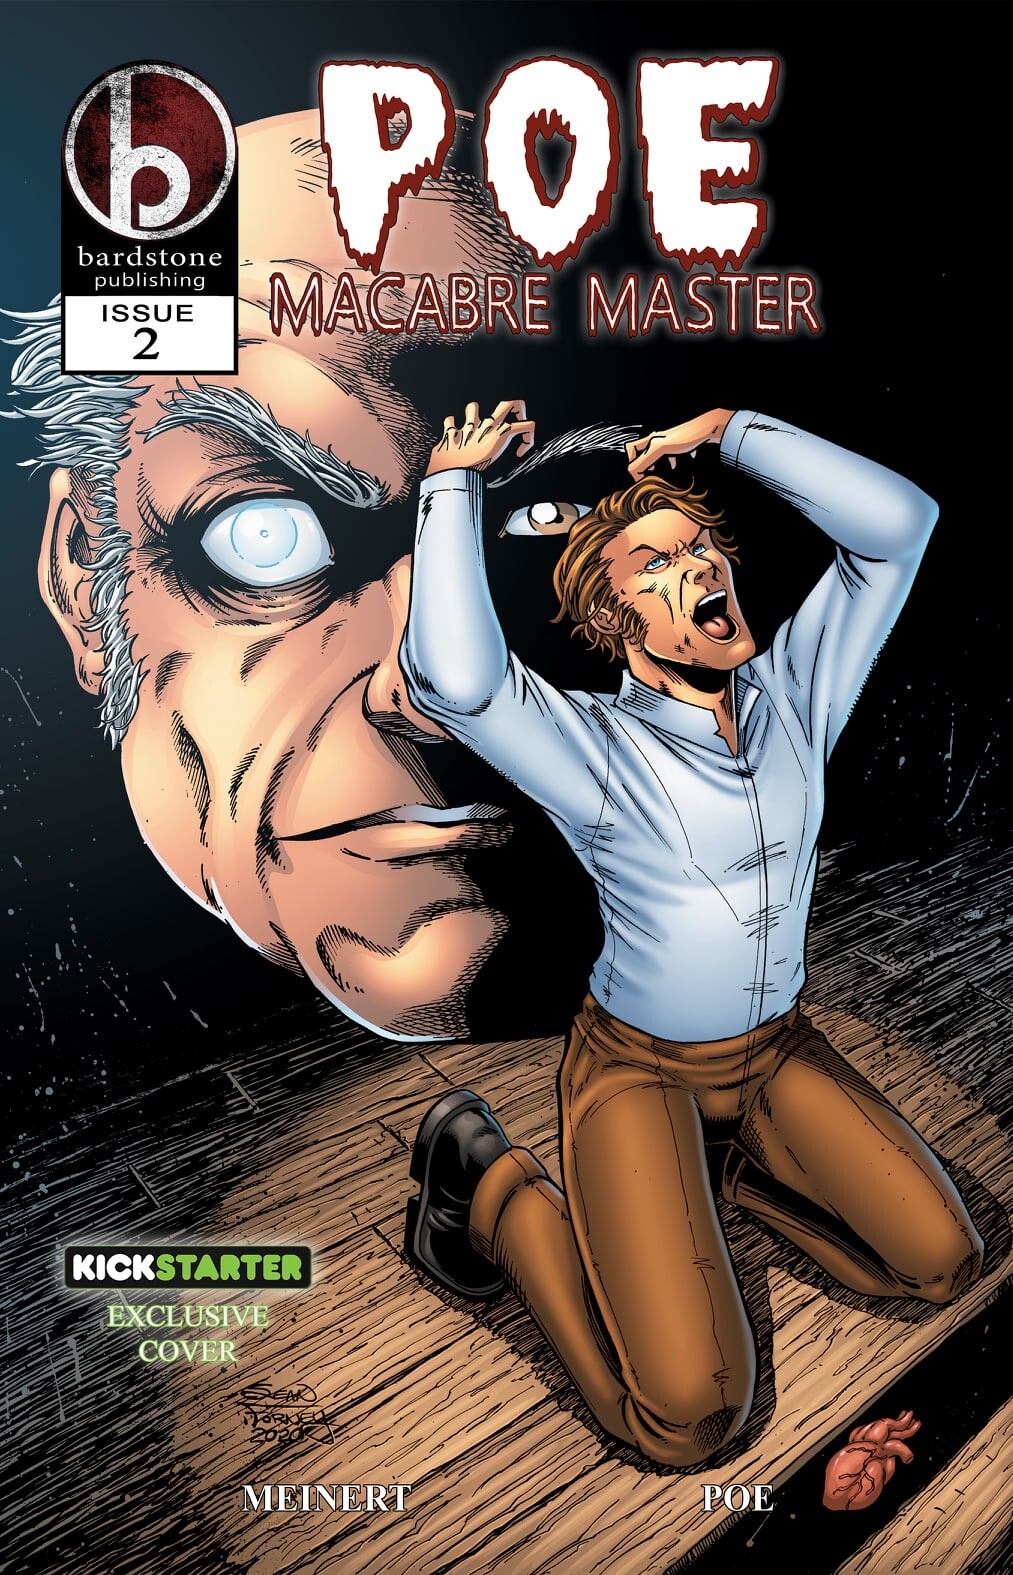 Poe Macabre Master 2 exclusive cover 

Pencils, inks, and colors by Sean Forney